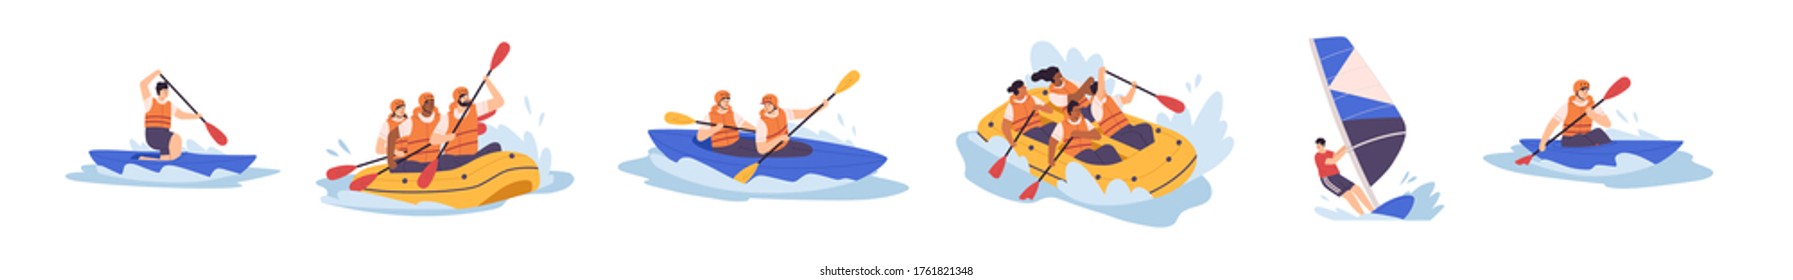 Set of people enjoy active water sports vector illustration. Collection of extreme man and woman rafting, kayaking, canoeing and sailing isolated. Diverse person in protective helmet and vest